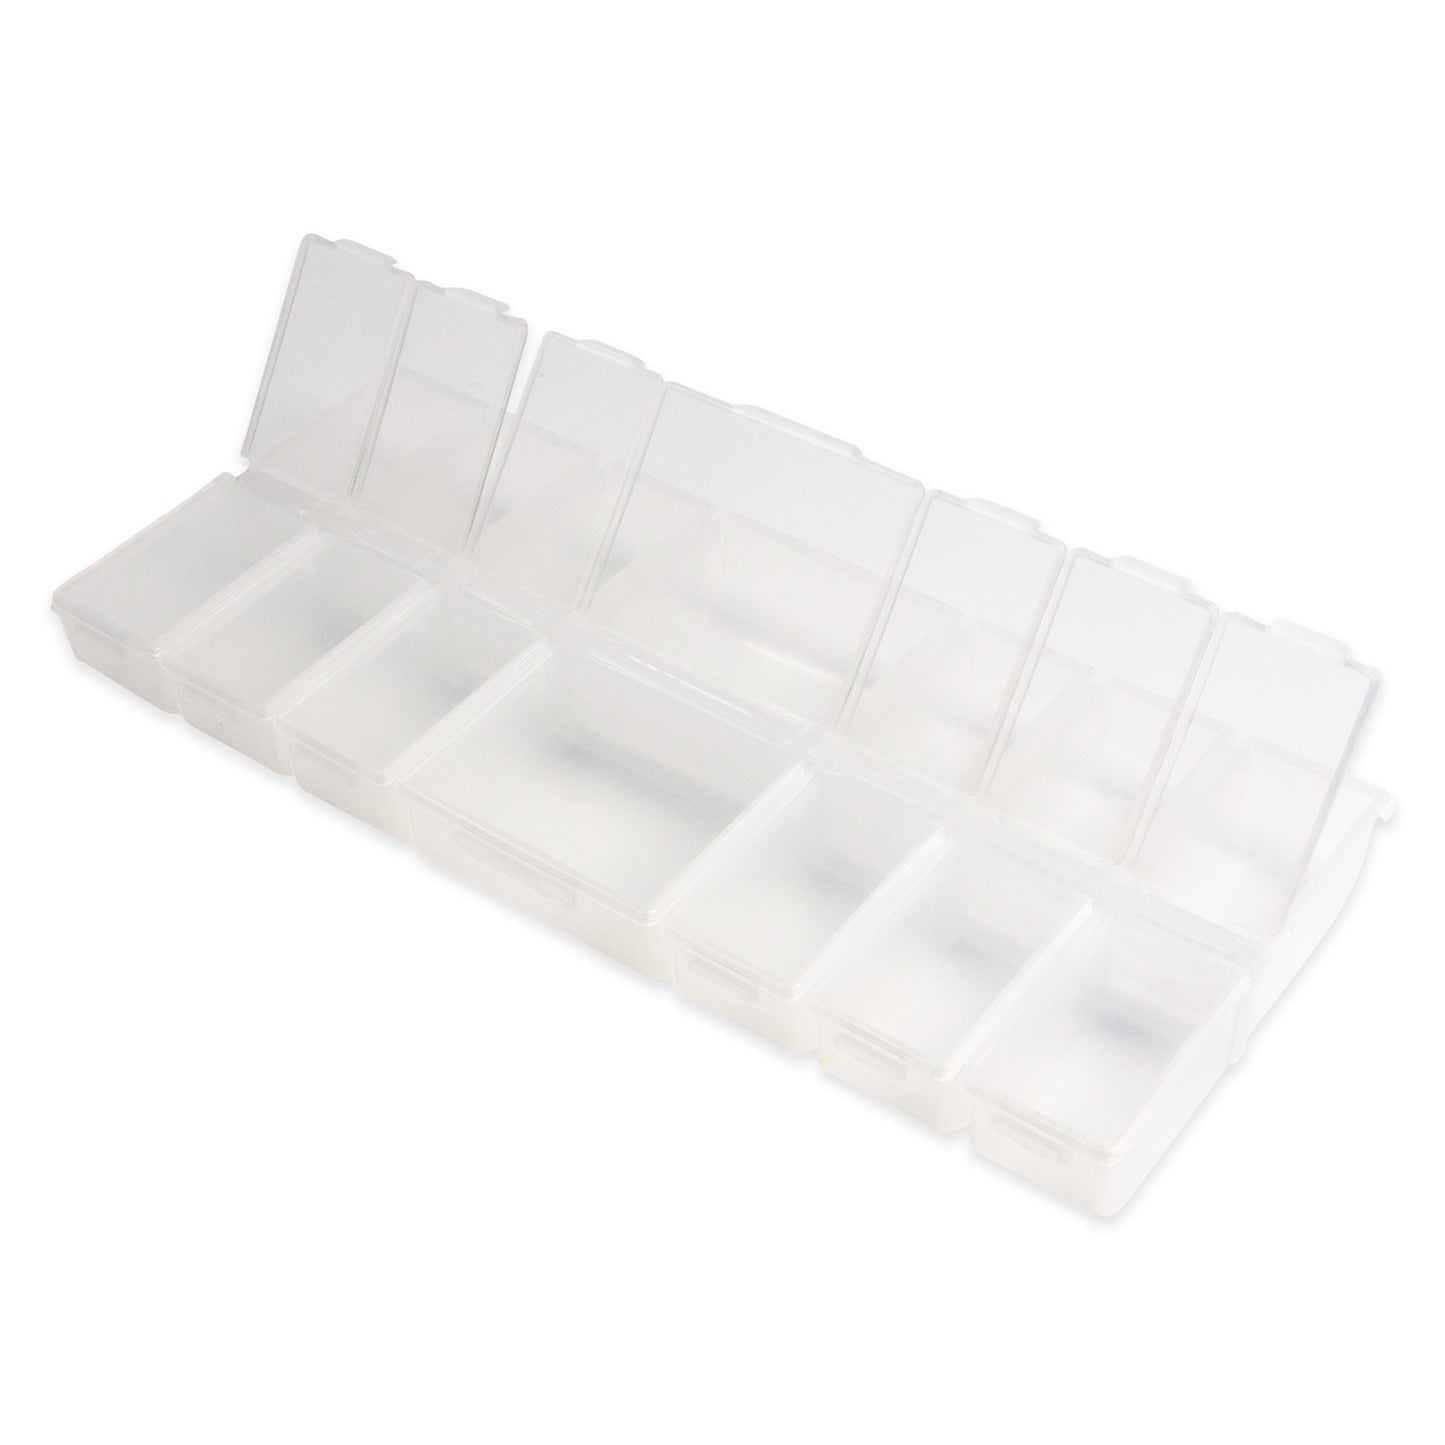 14 Compartments with snap lids